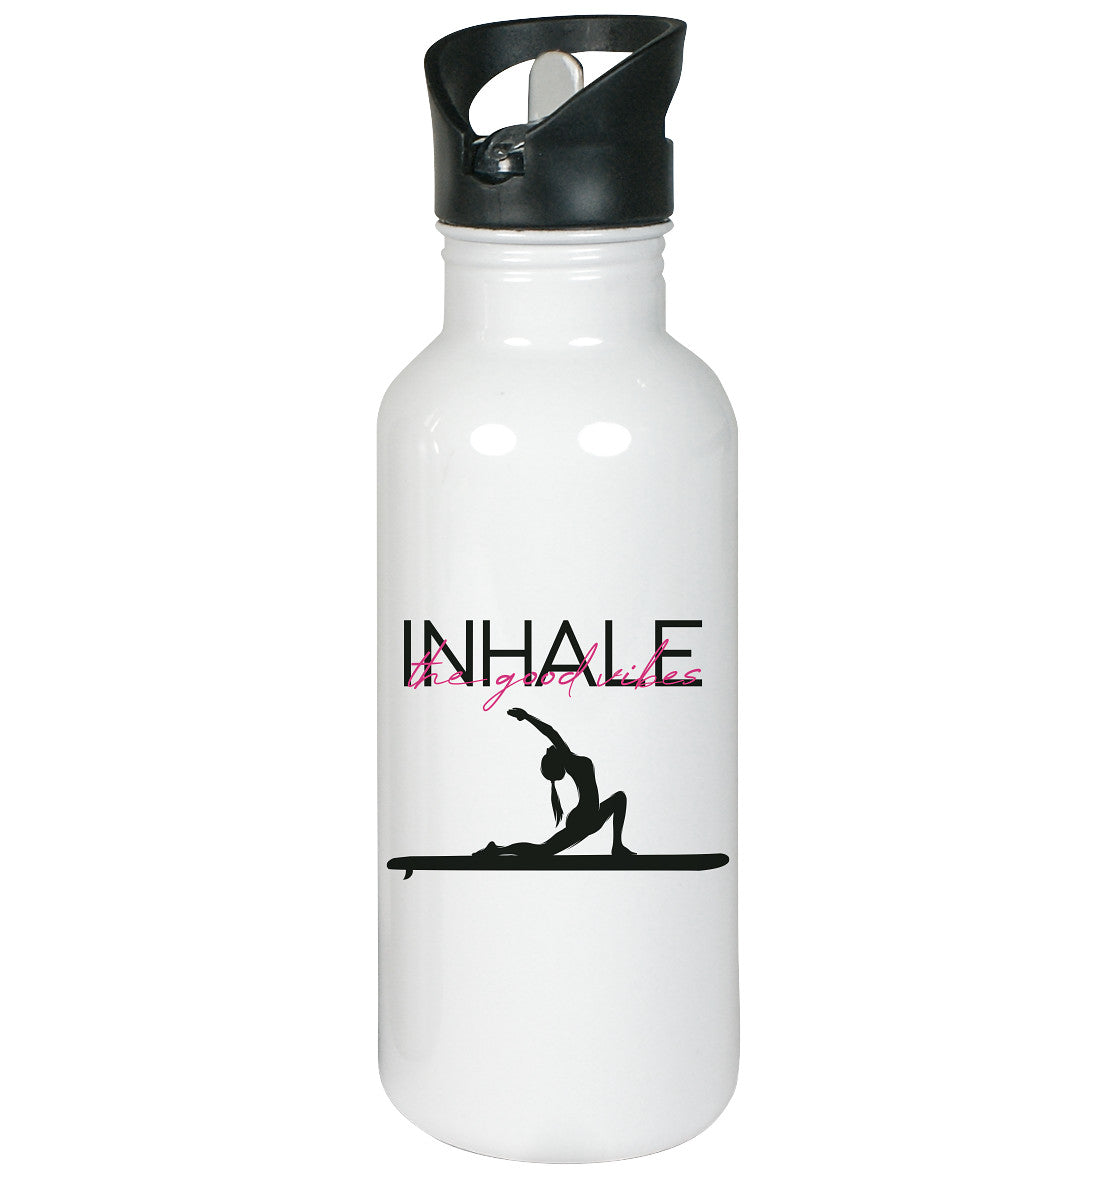 SUP Yoga-INHALE the good vibes - Edelstahl-Trinkflasche